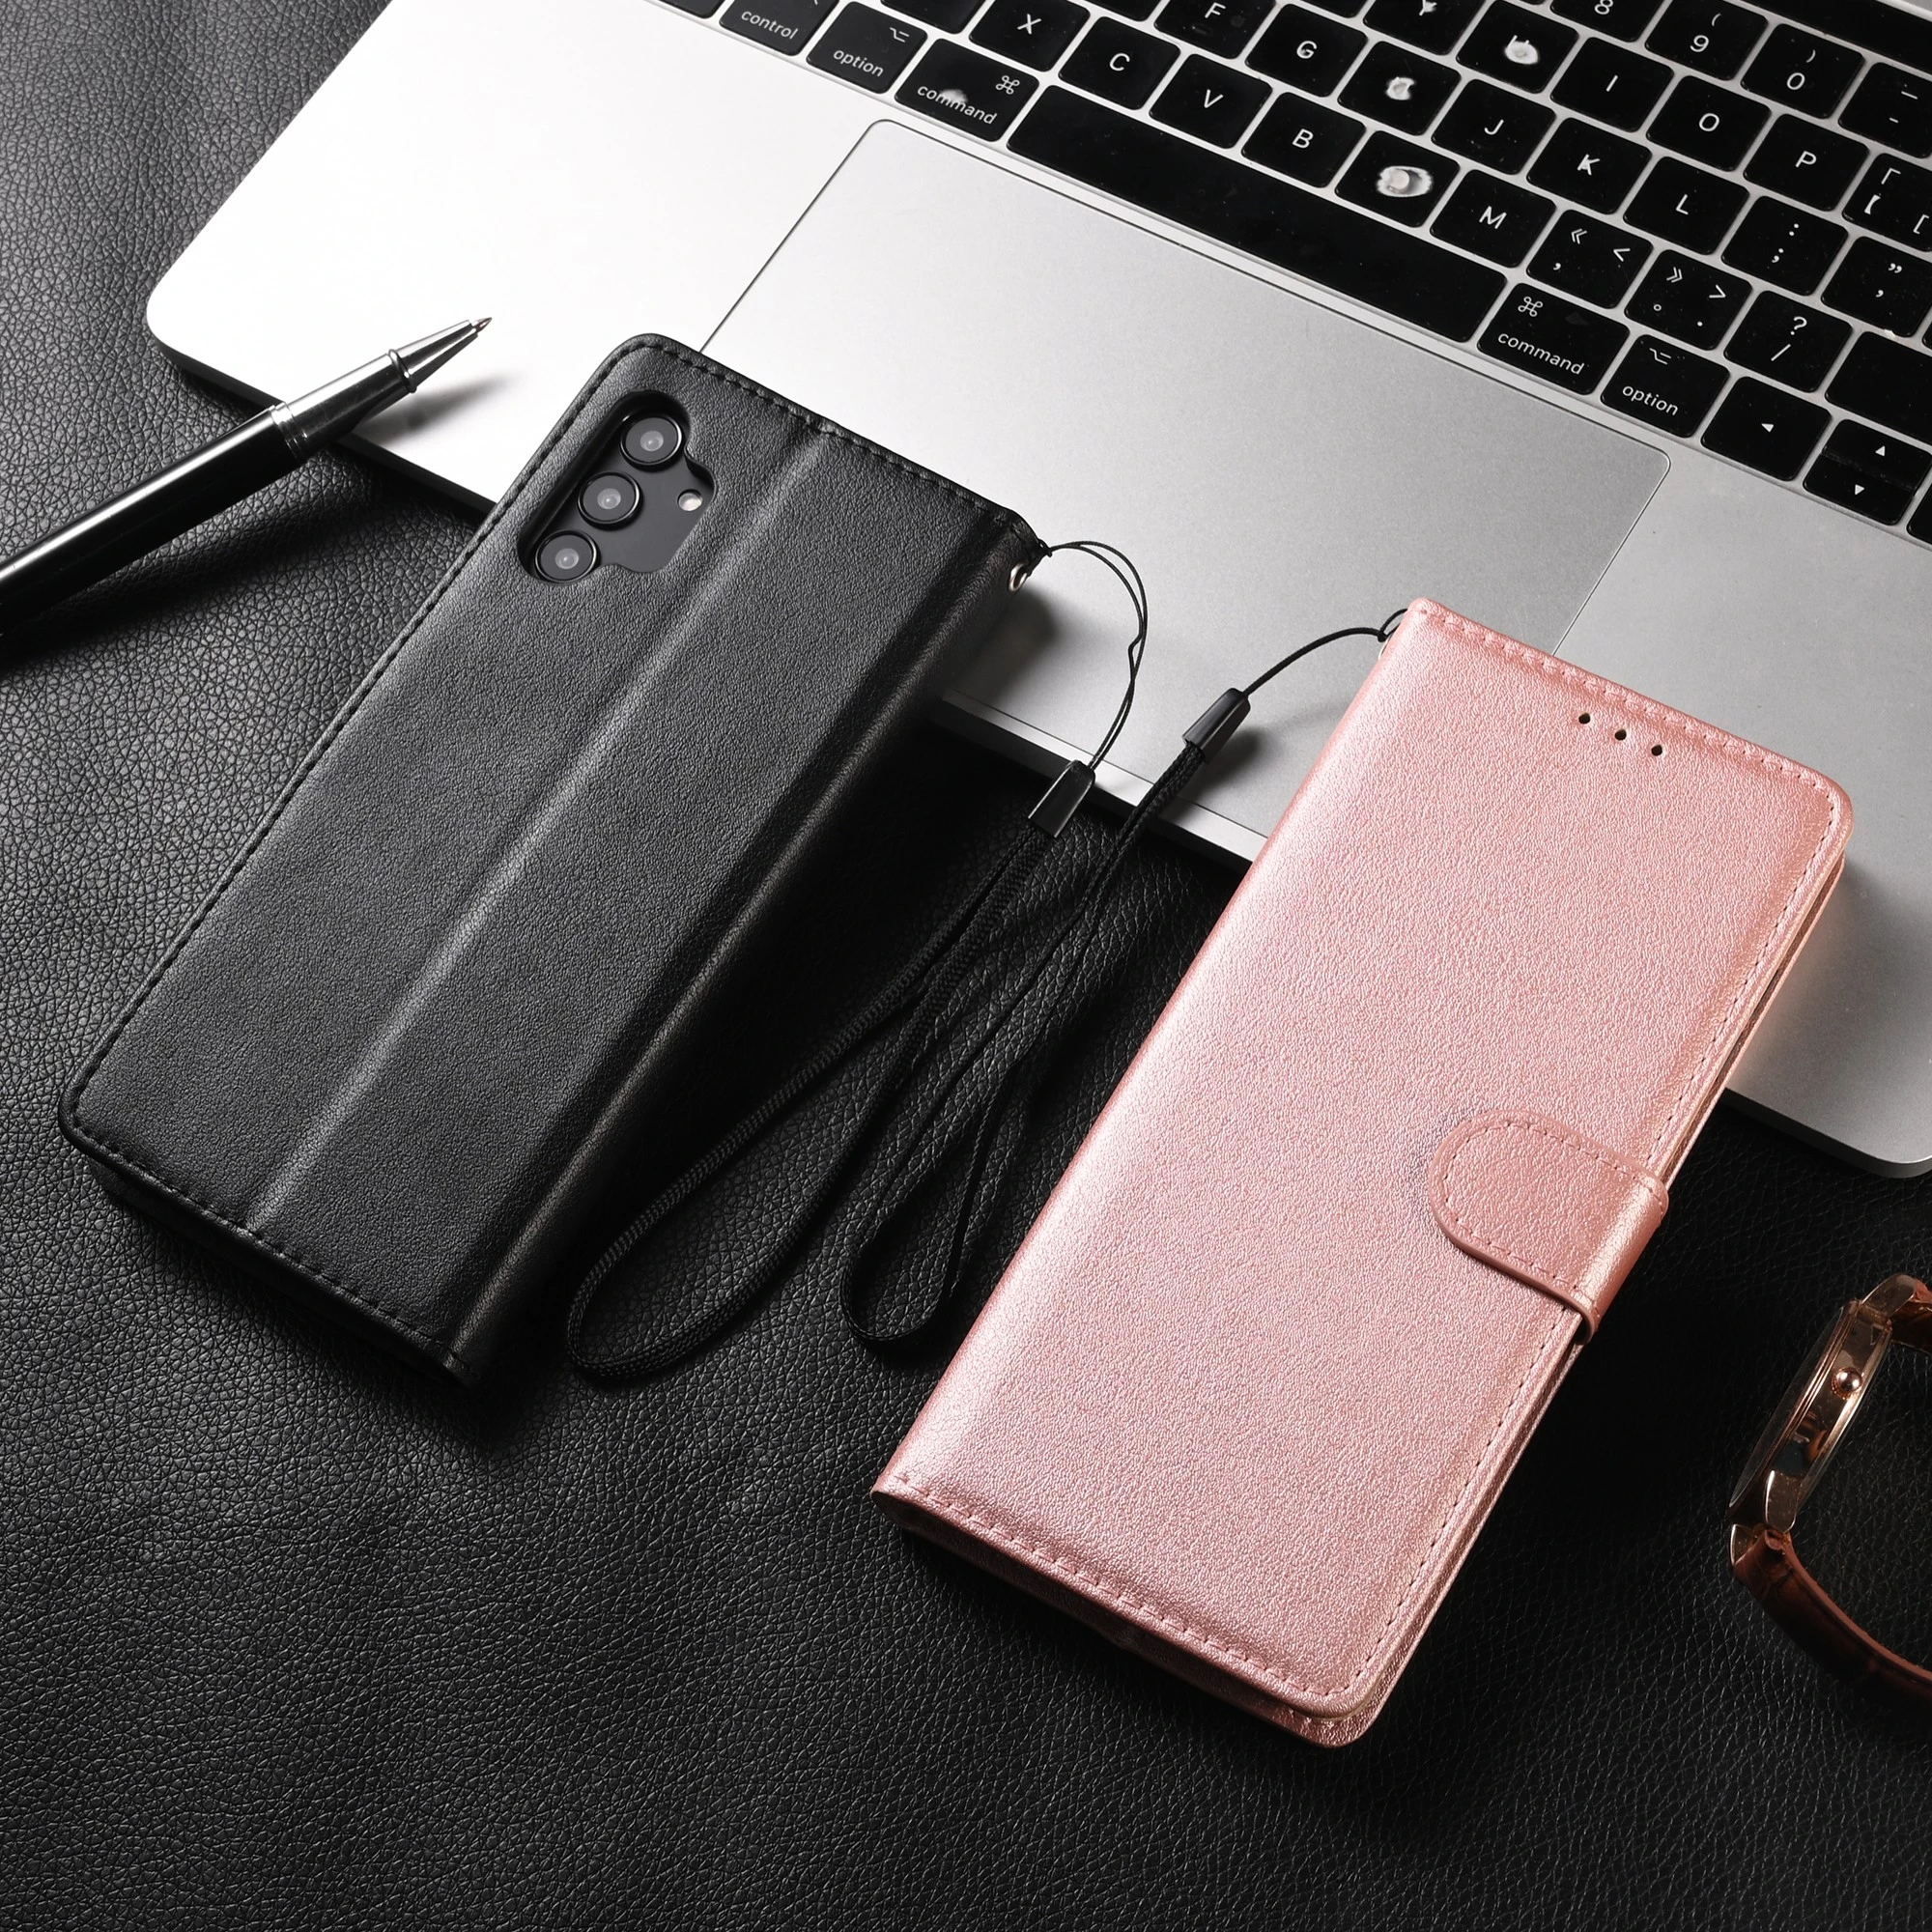 Leather Case For Samsung Galaxy A02S A51 A10 A21S A20S A20E A12 A40 A50 A71 A70 A3 A5 A6 A7 A8 Protect Cover Flip Wallet Funda